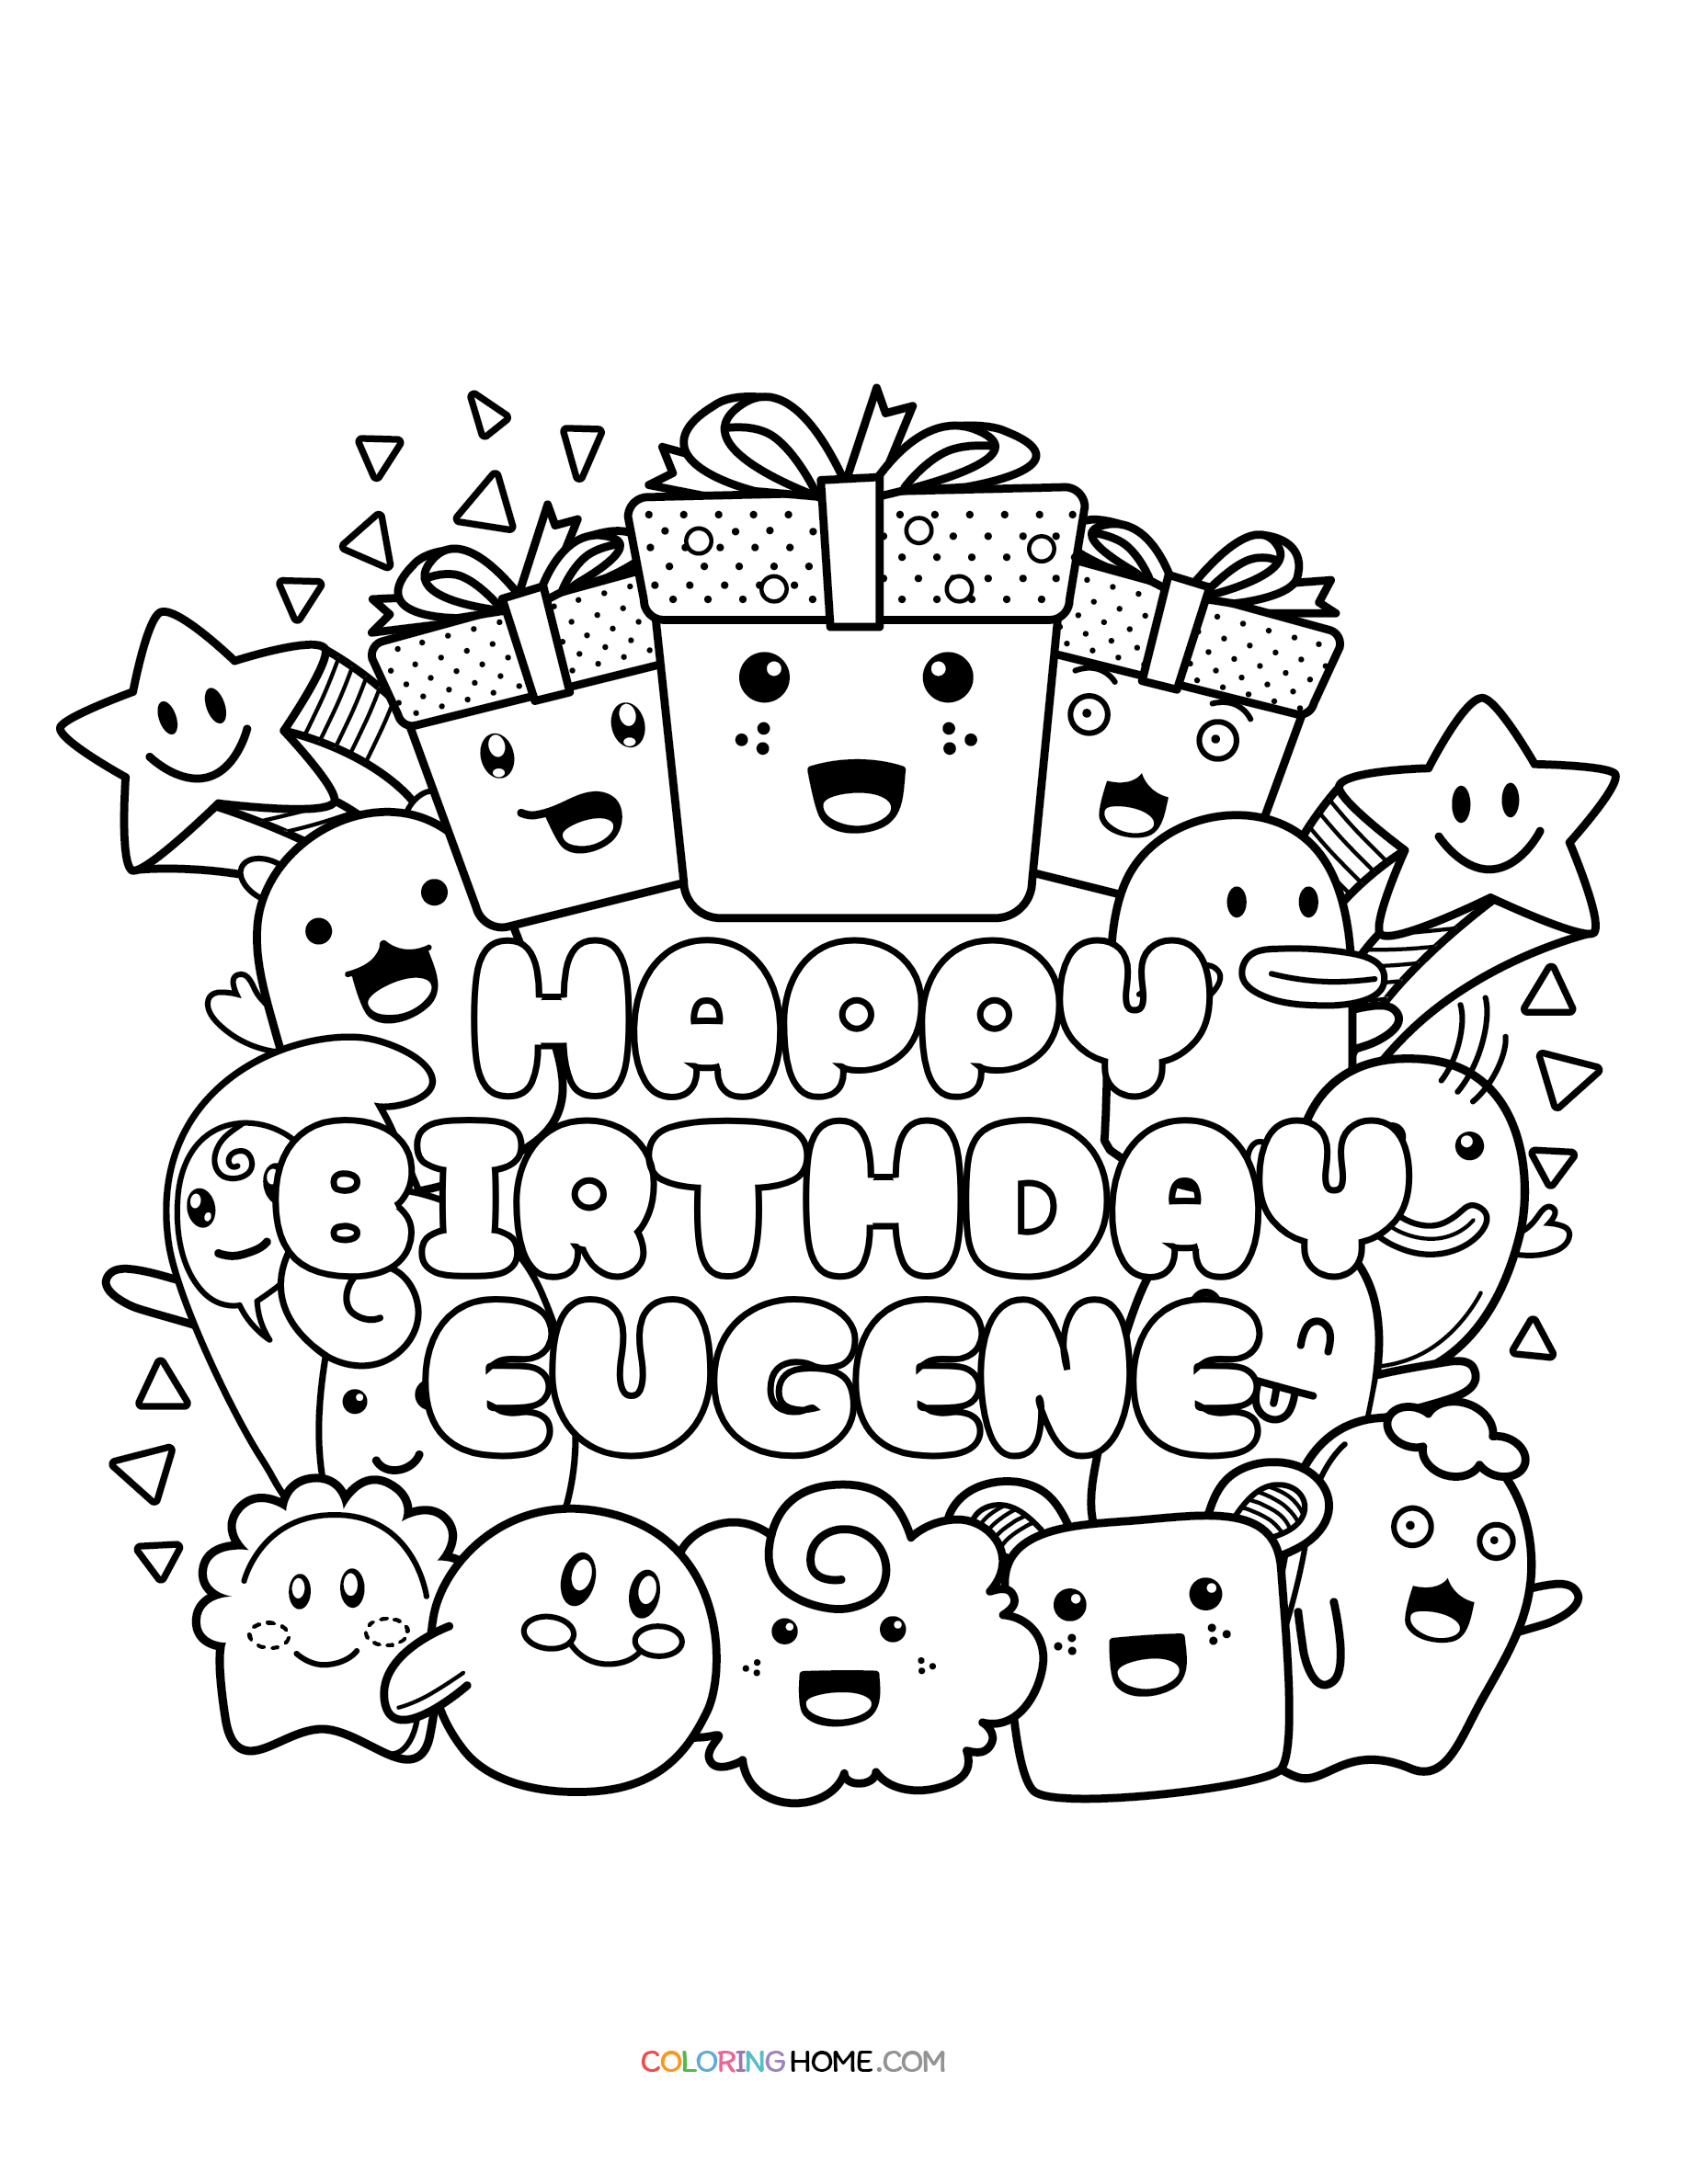 Happy Birthday Eugene coloring page